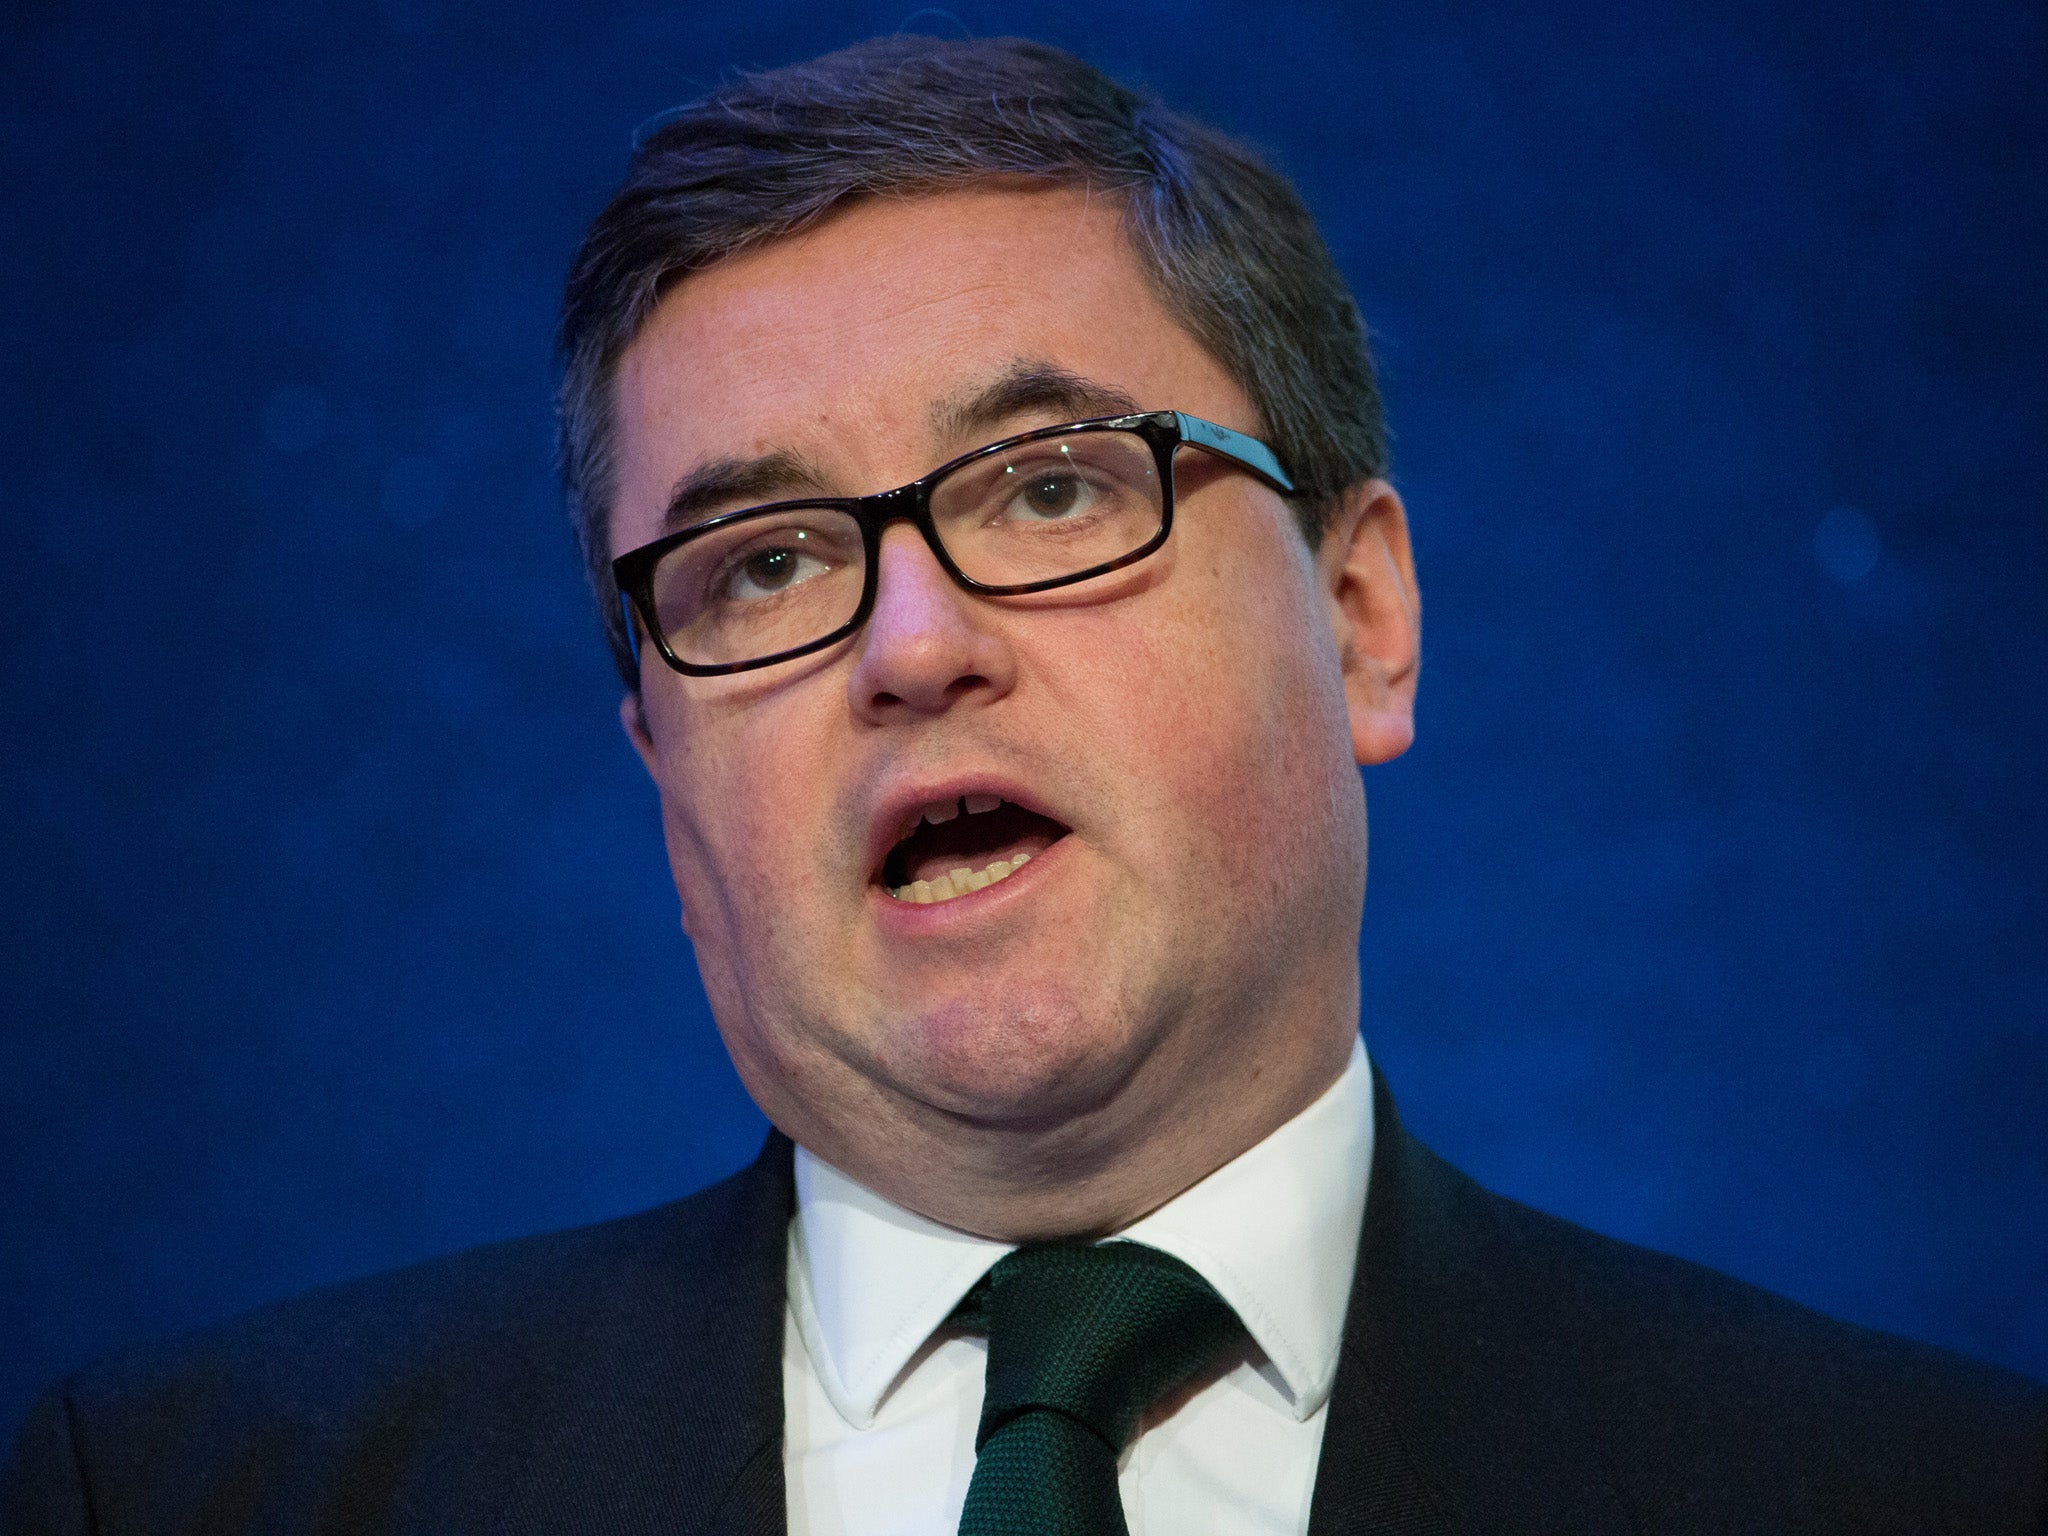 Robert Buckland said the extended custody time limits law would protect victims